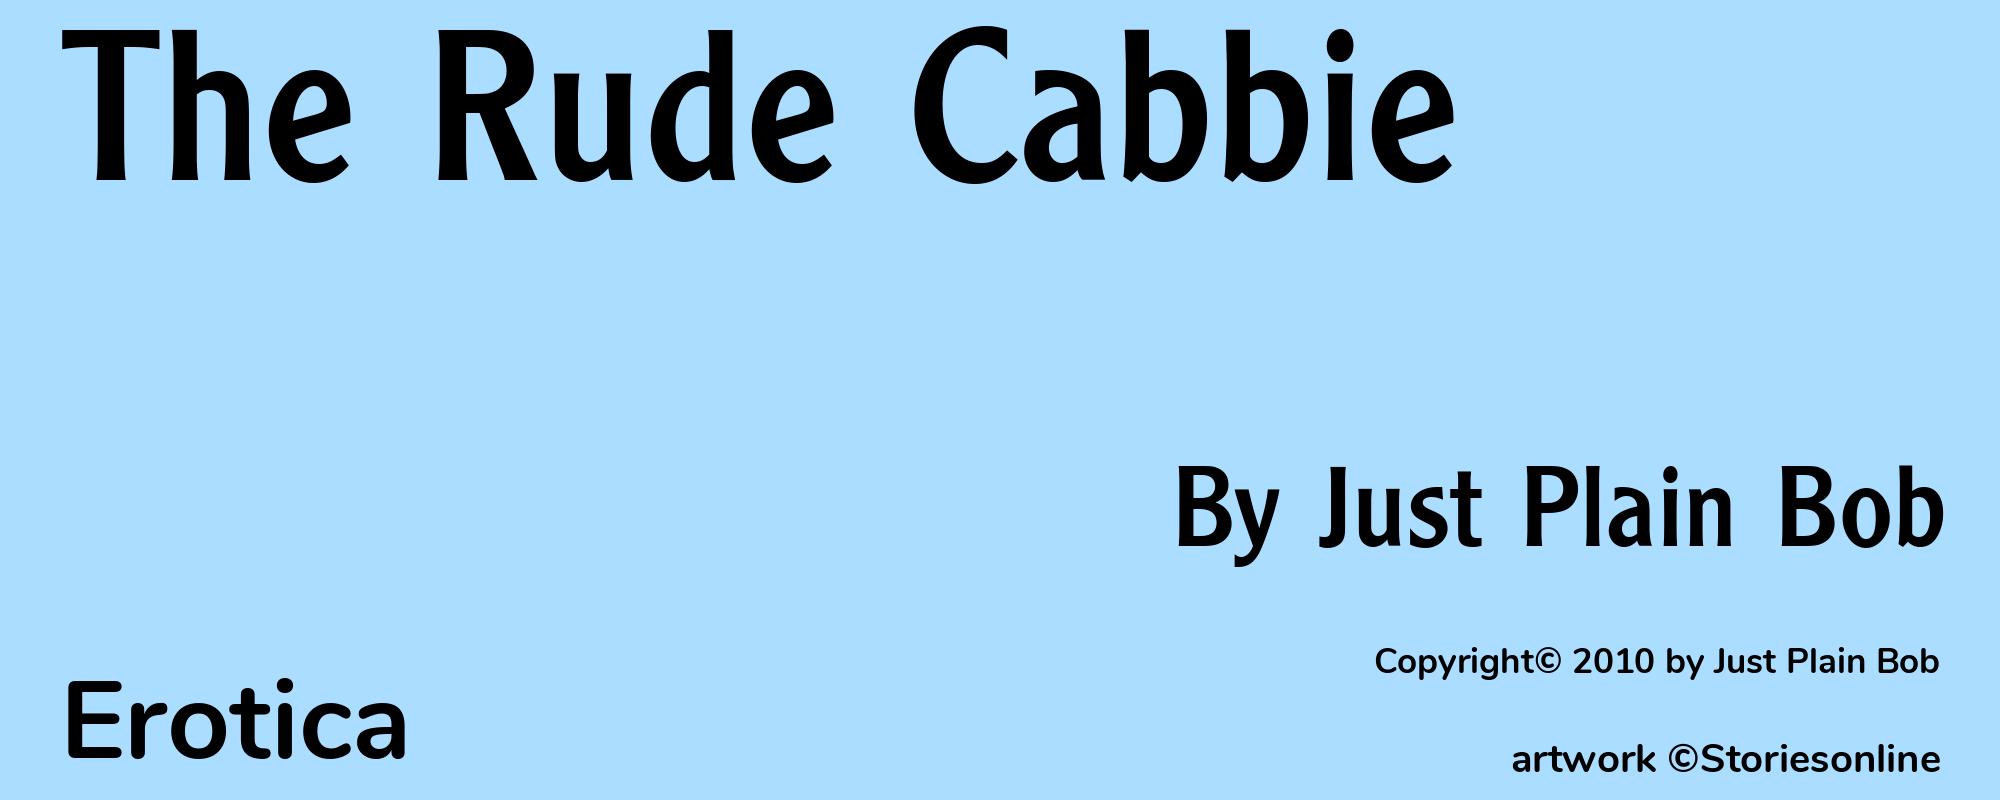 The Rude Cabbie - Cover